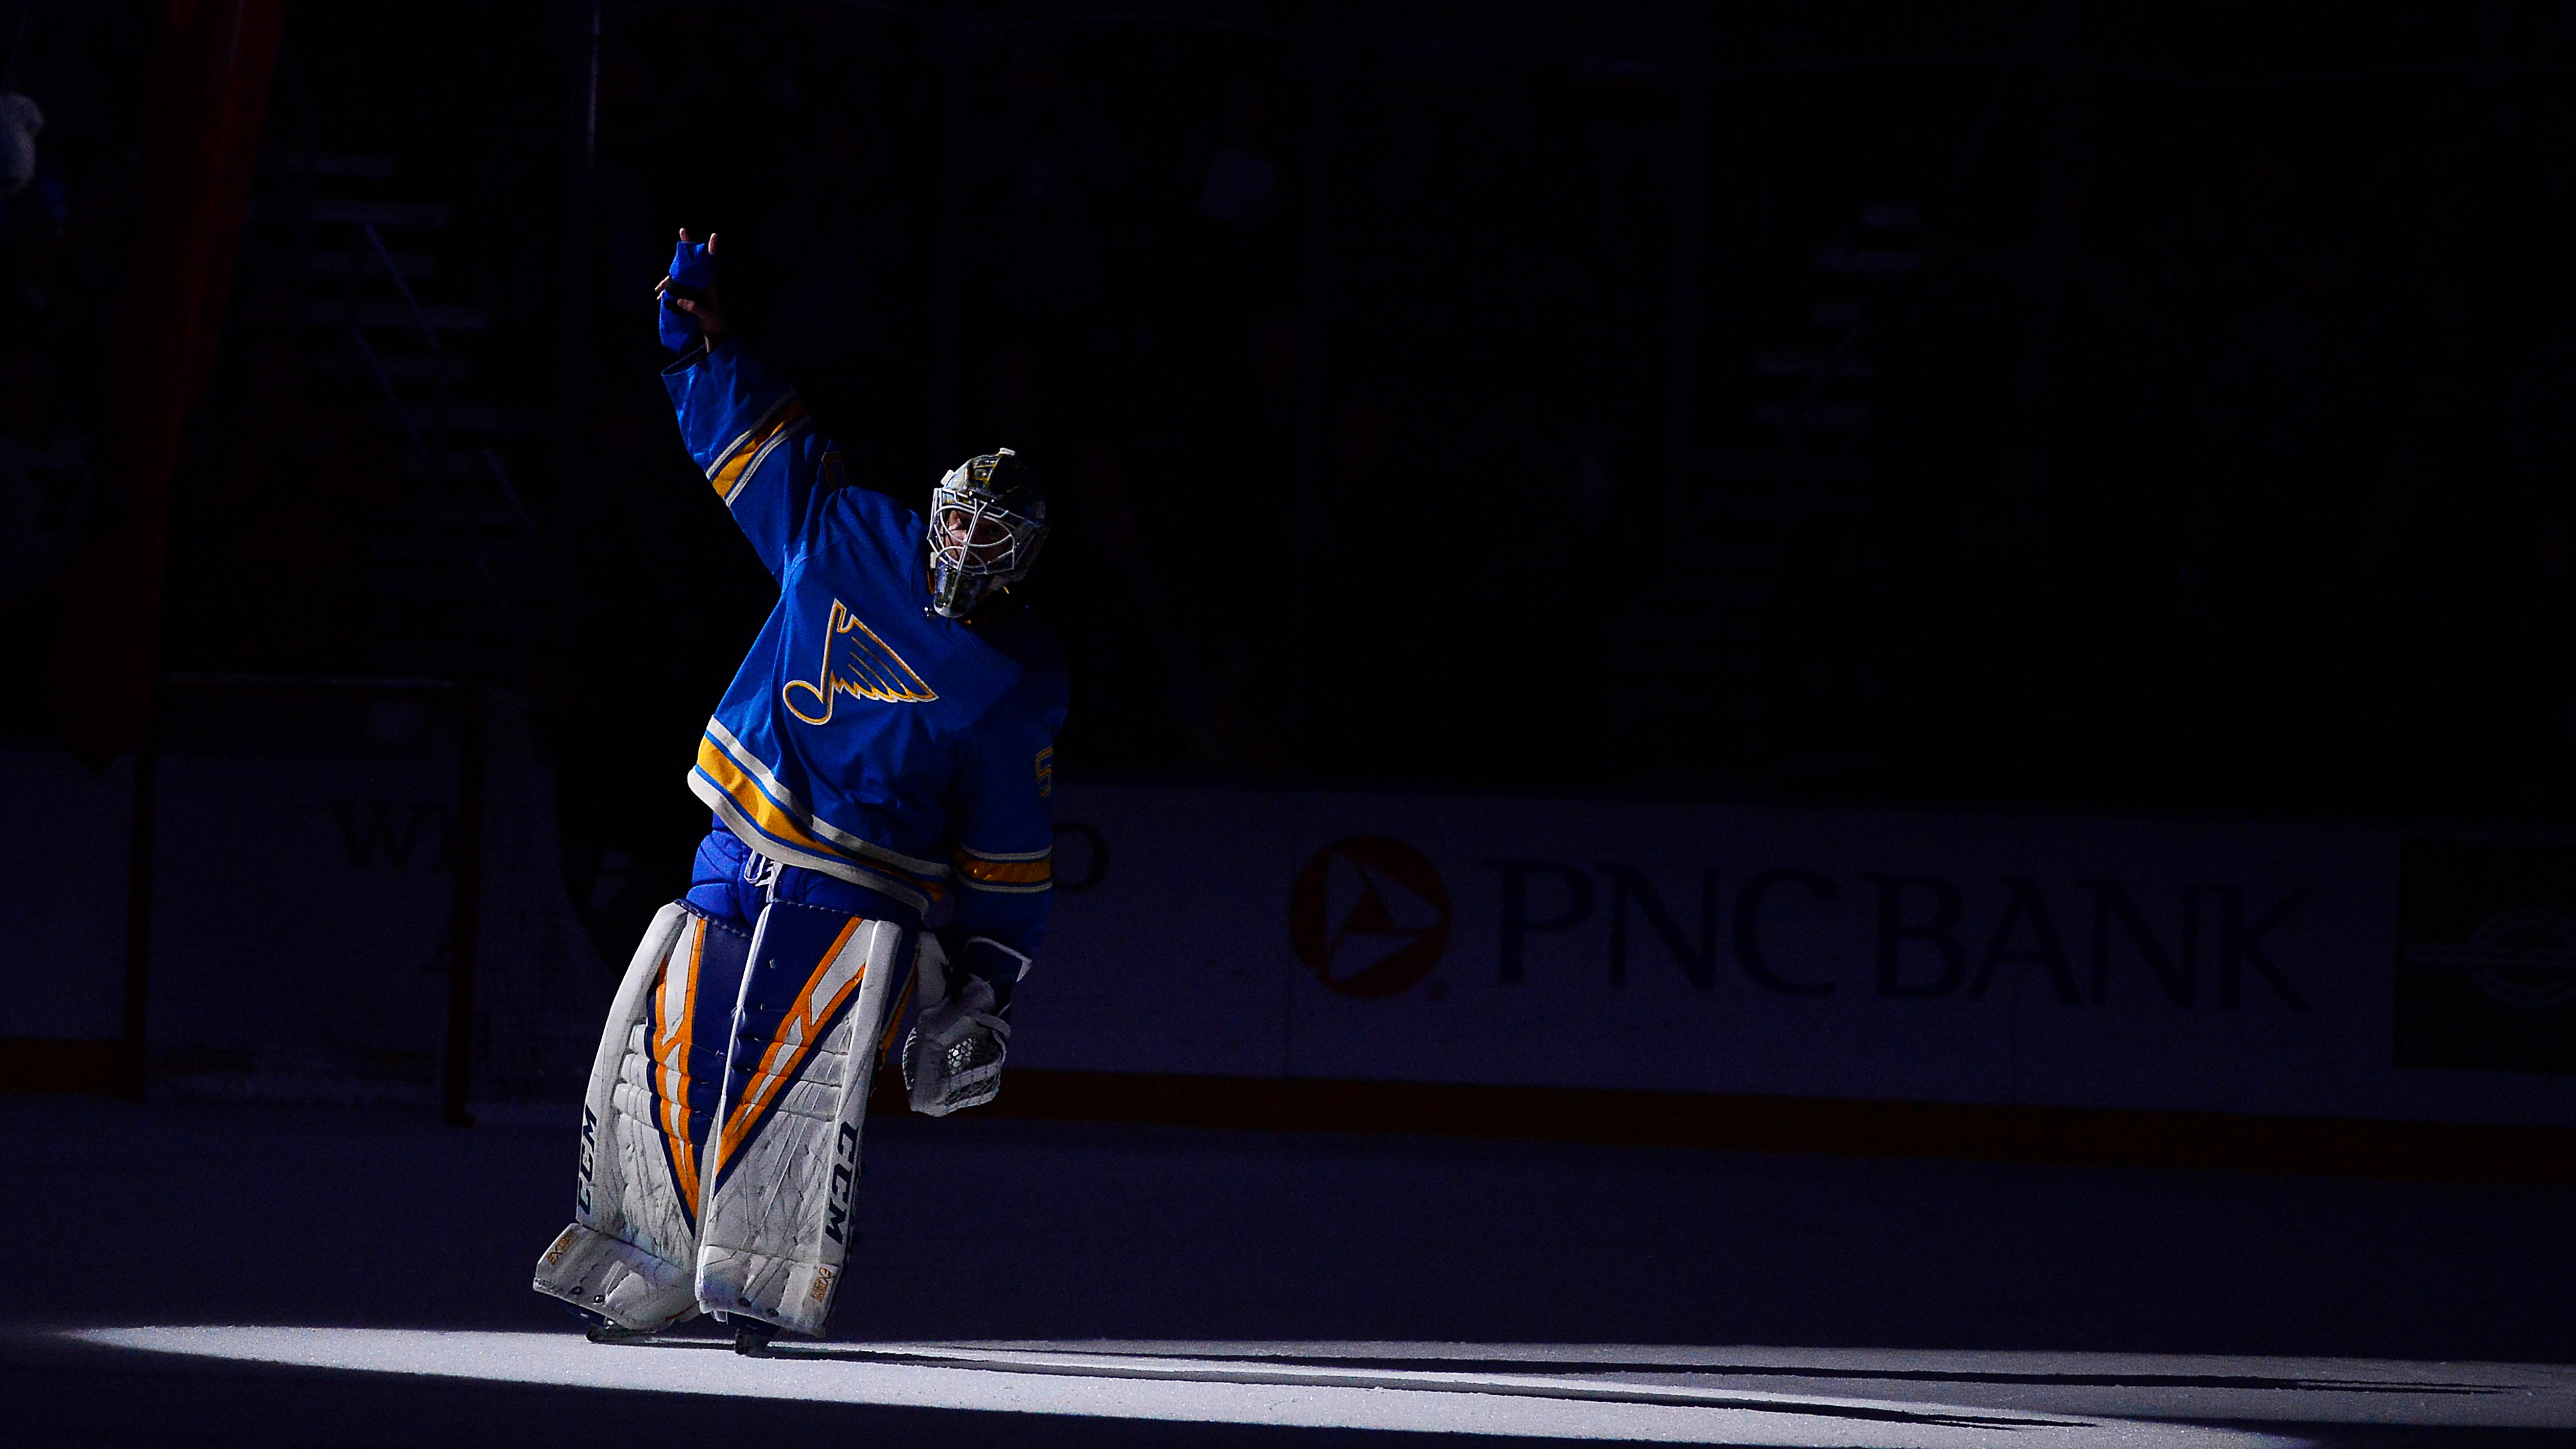 Binnington's strong play earns him NHL’s first star weekly honors